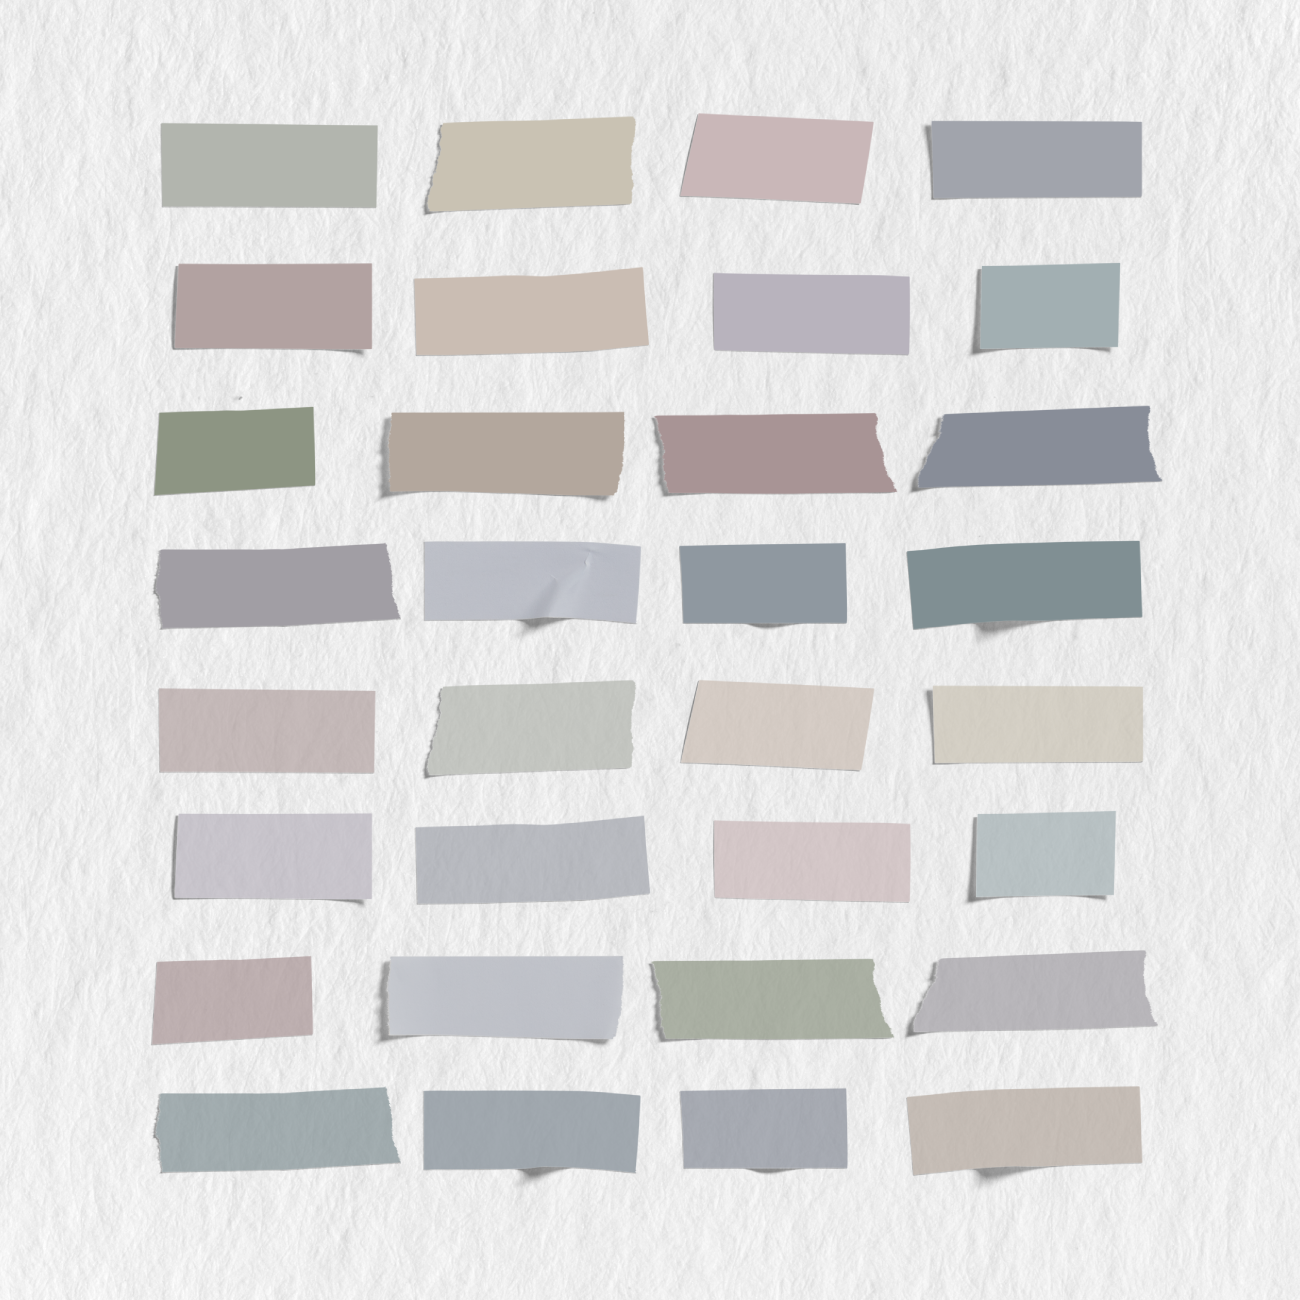 335 Muted Color Digital Sticky Notes - Stationery Pal